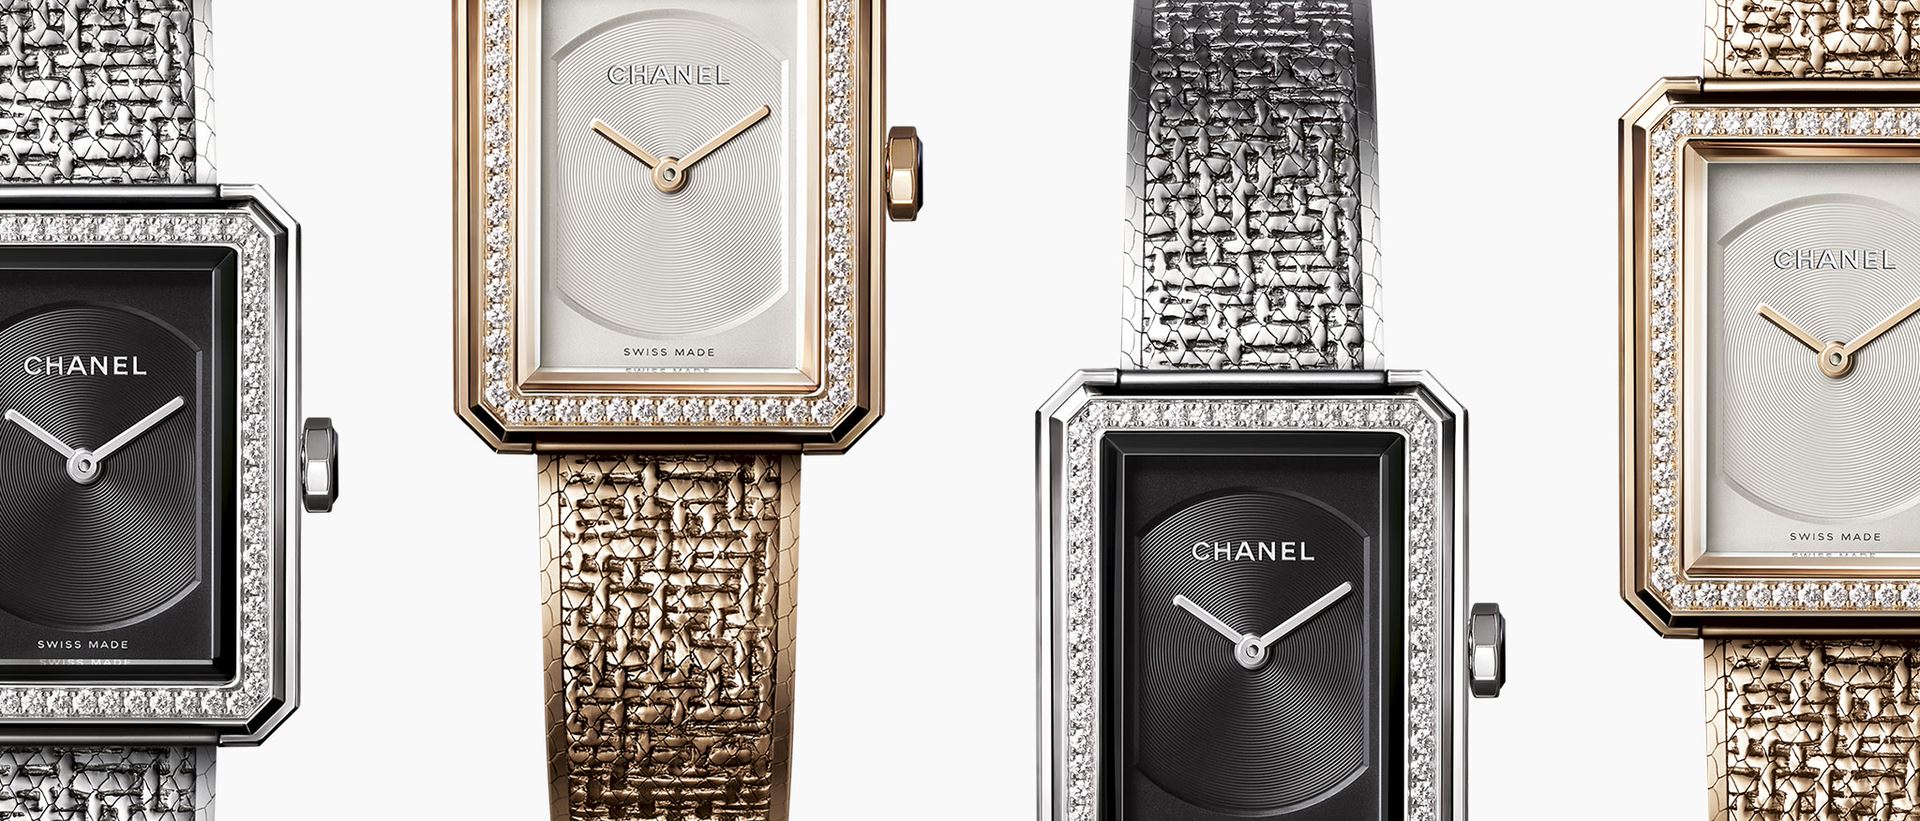 Christmas gift guide: The best watches for family and friends